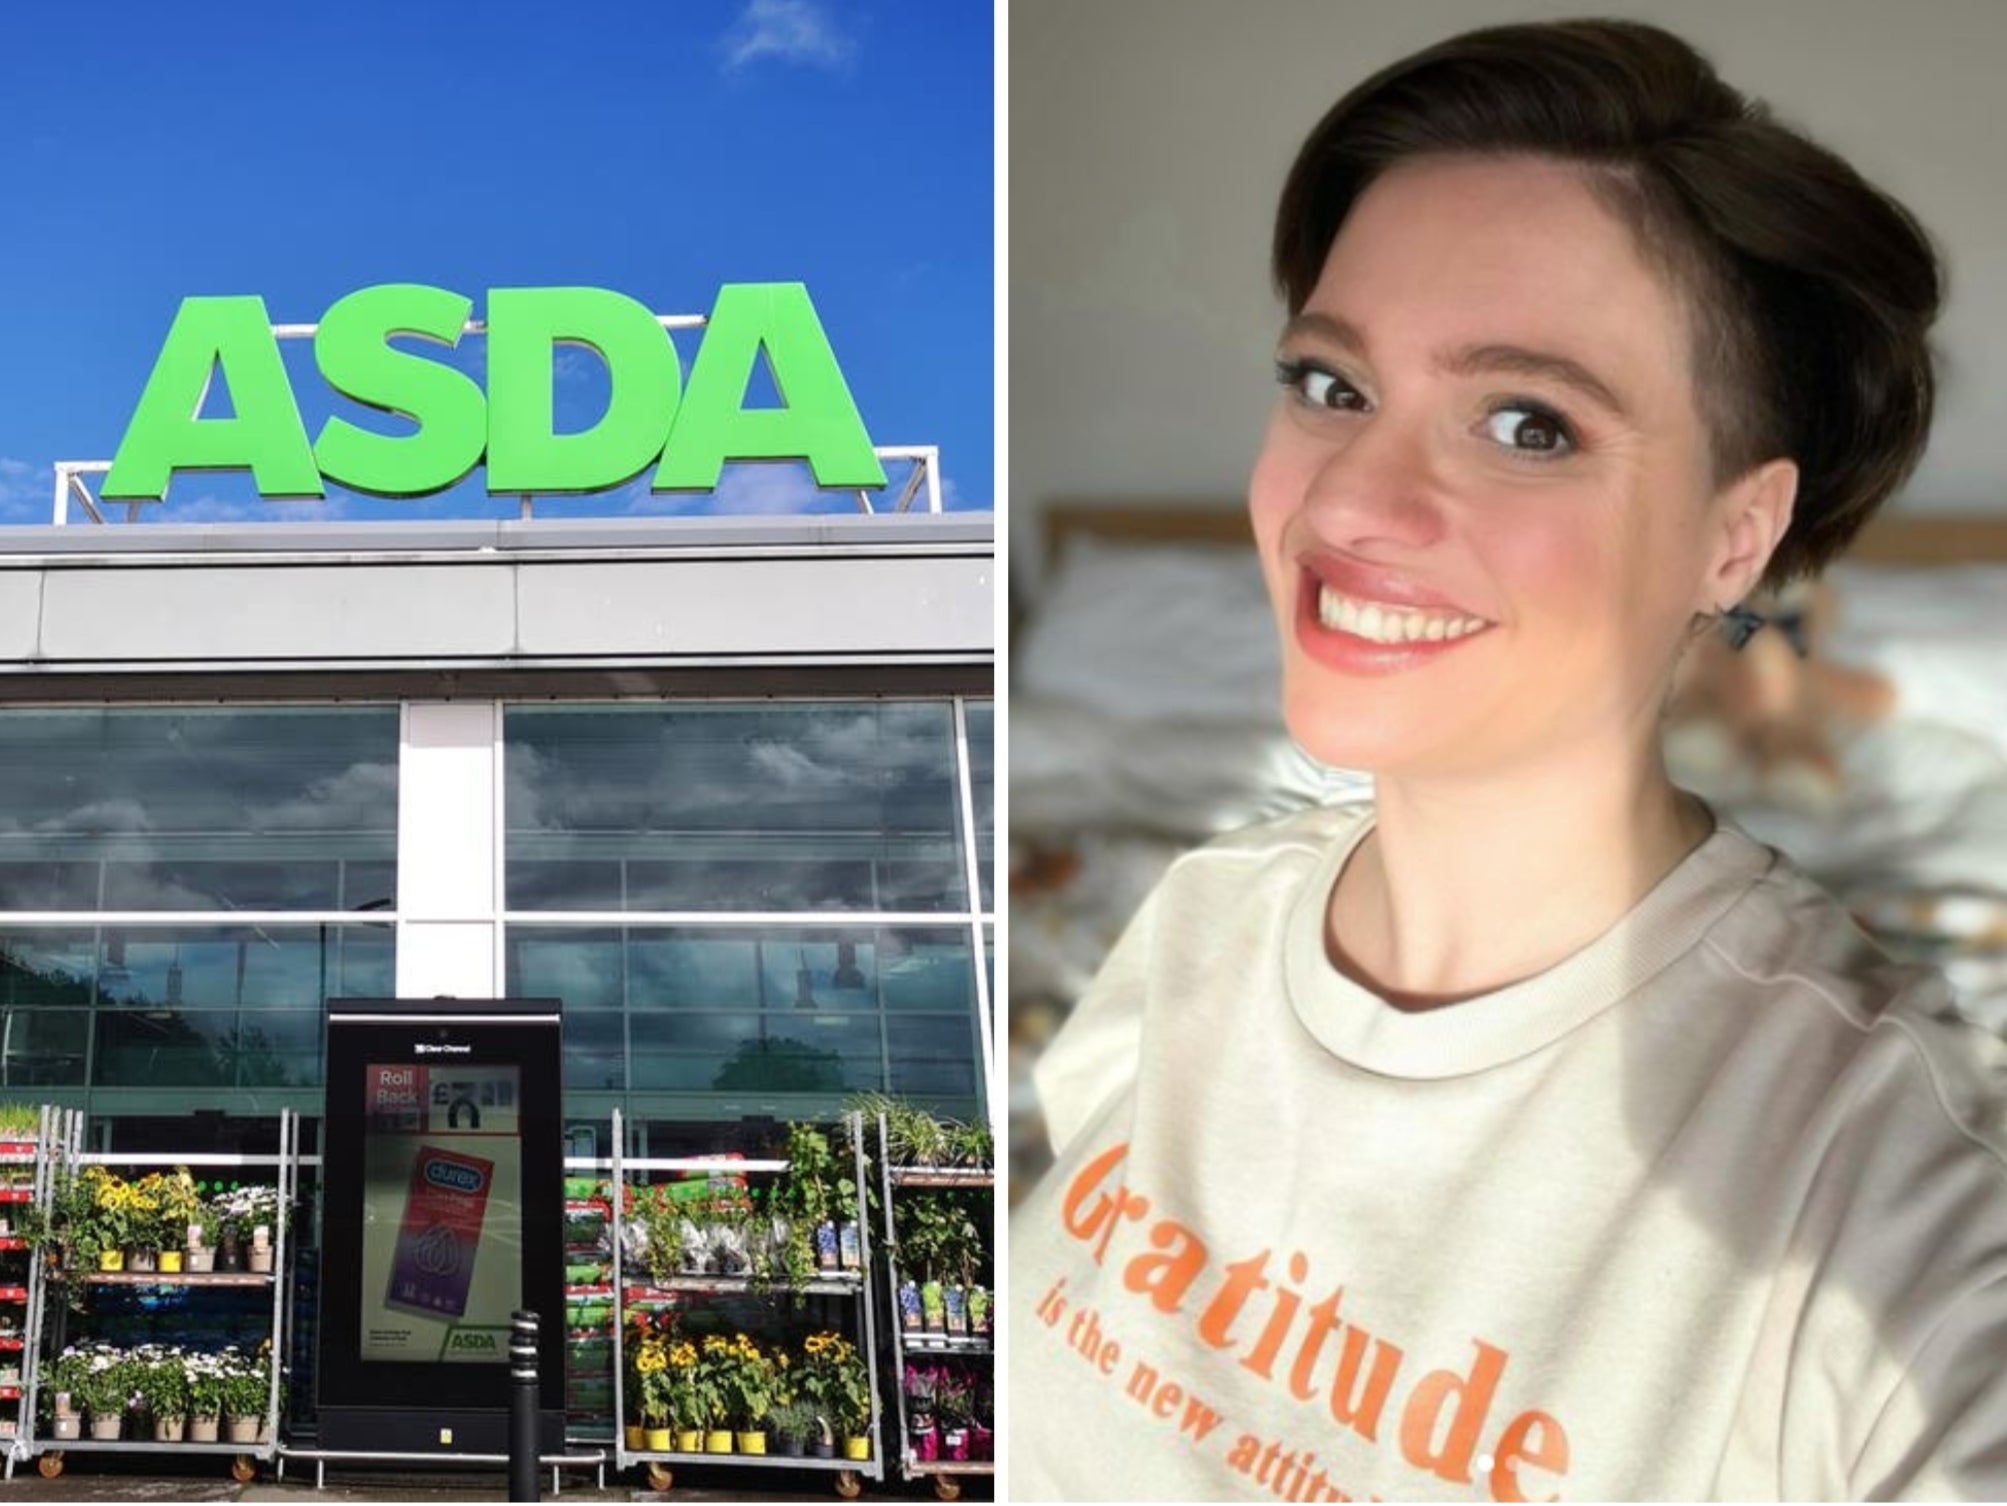 Asda will roll out its Smart Price range in all 581 stores